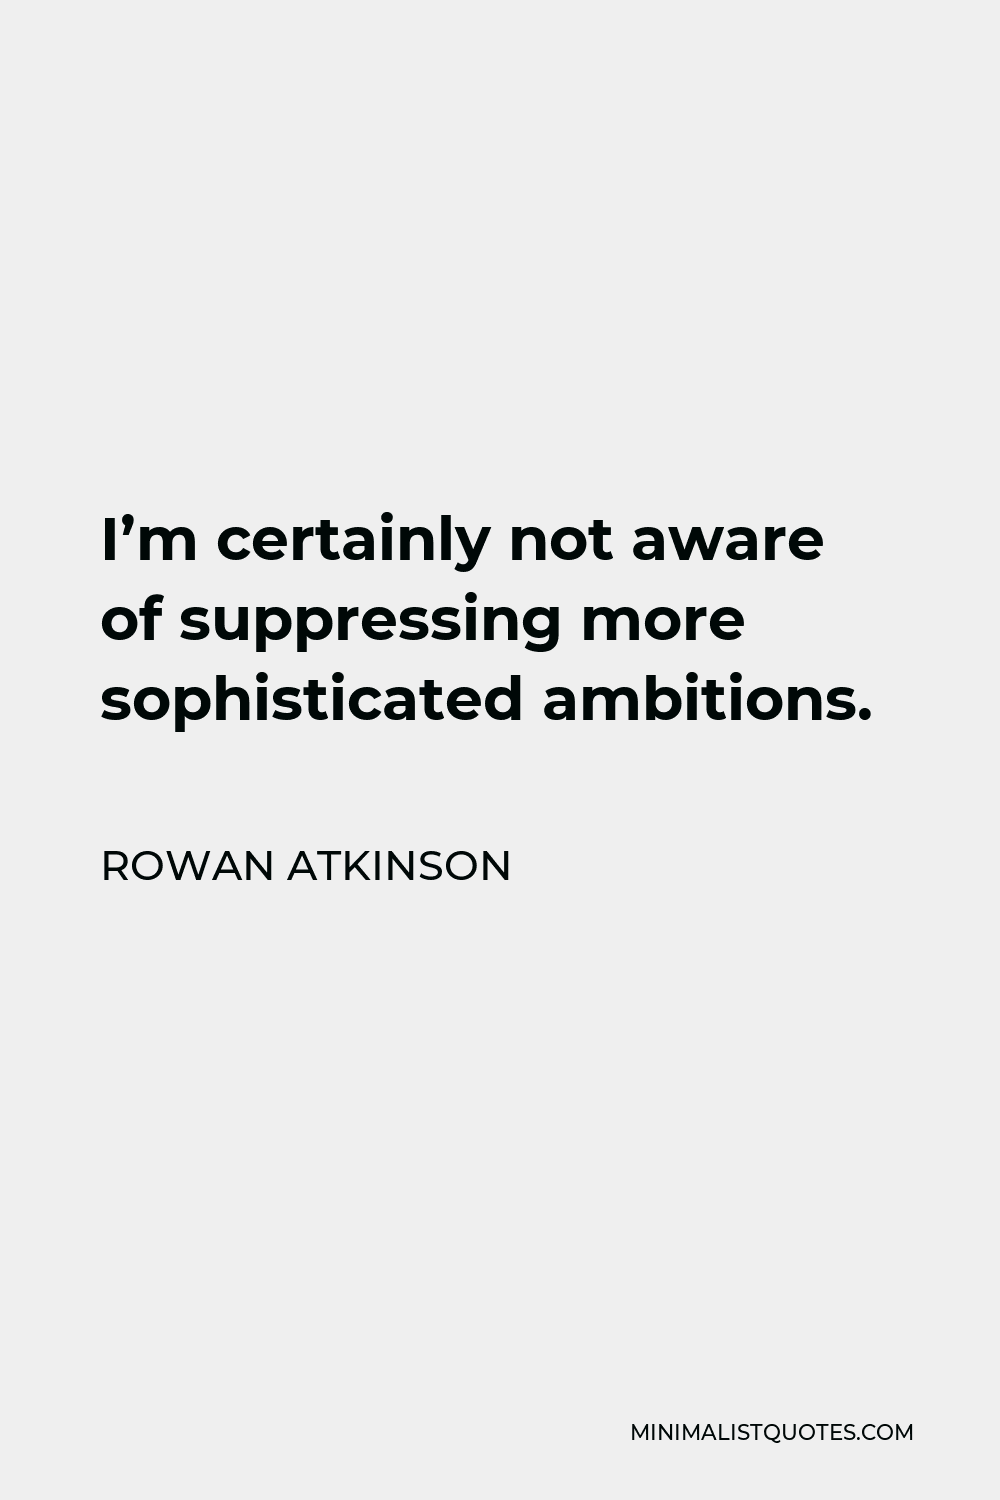 Rowan Atkinson Quote - I’m certainly not aware of suppressing more sophisticated ambitions.